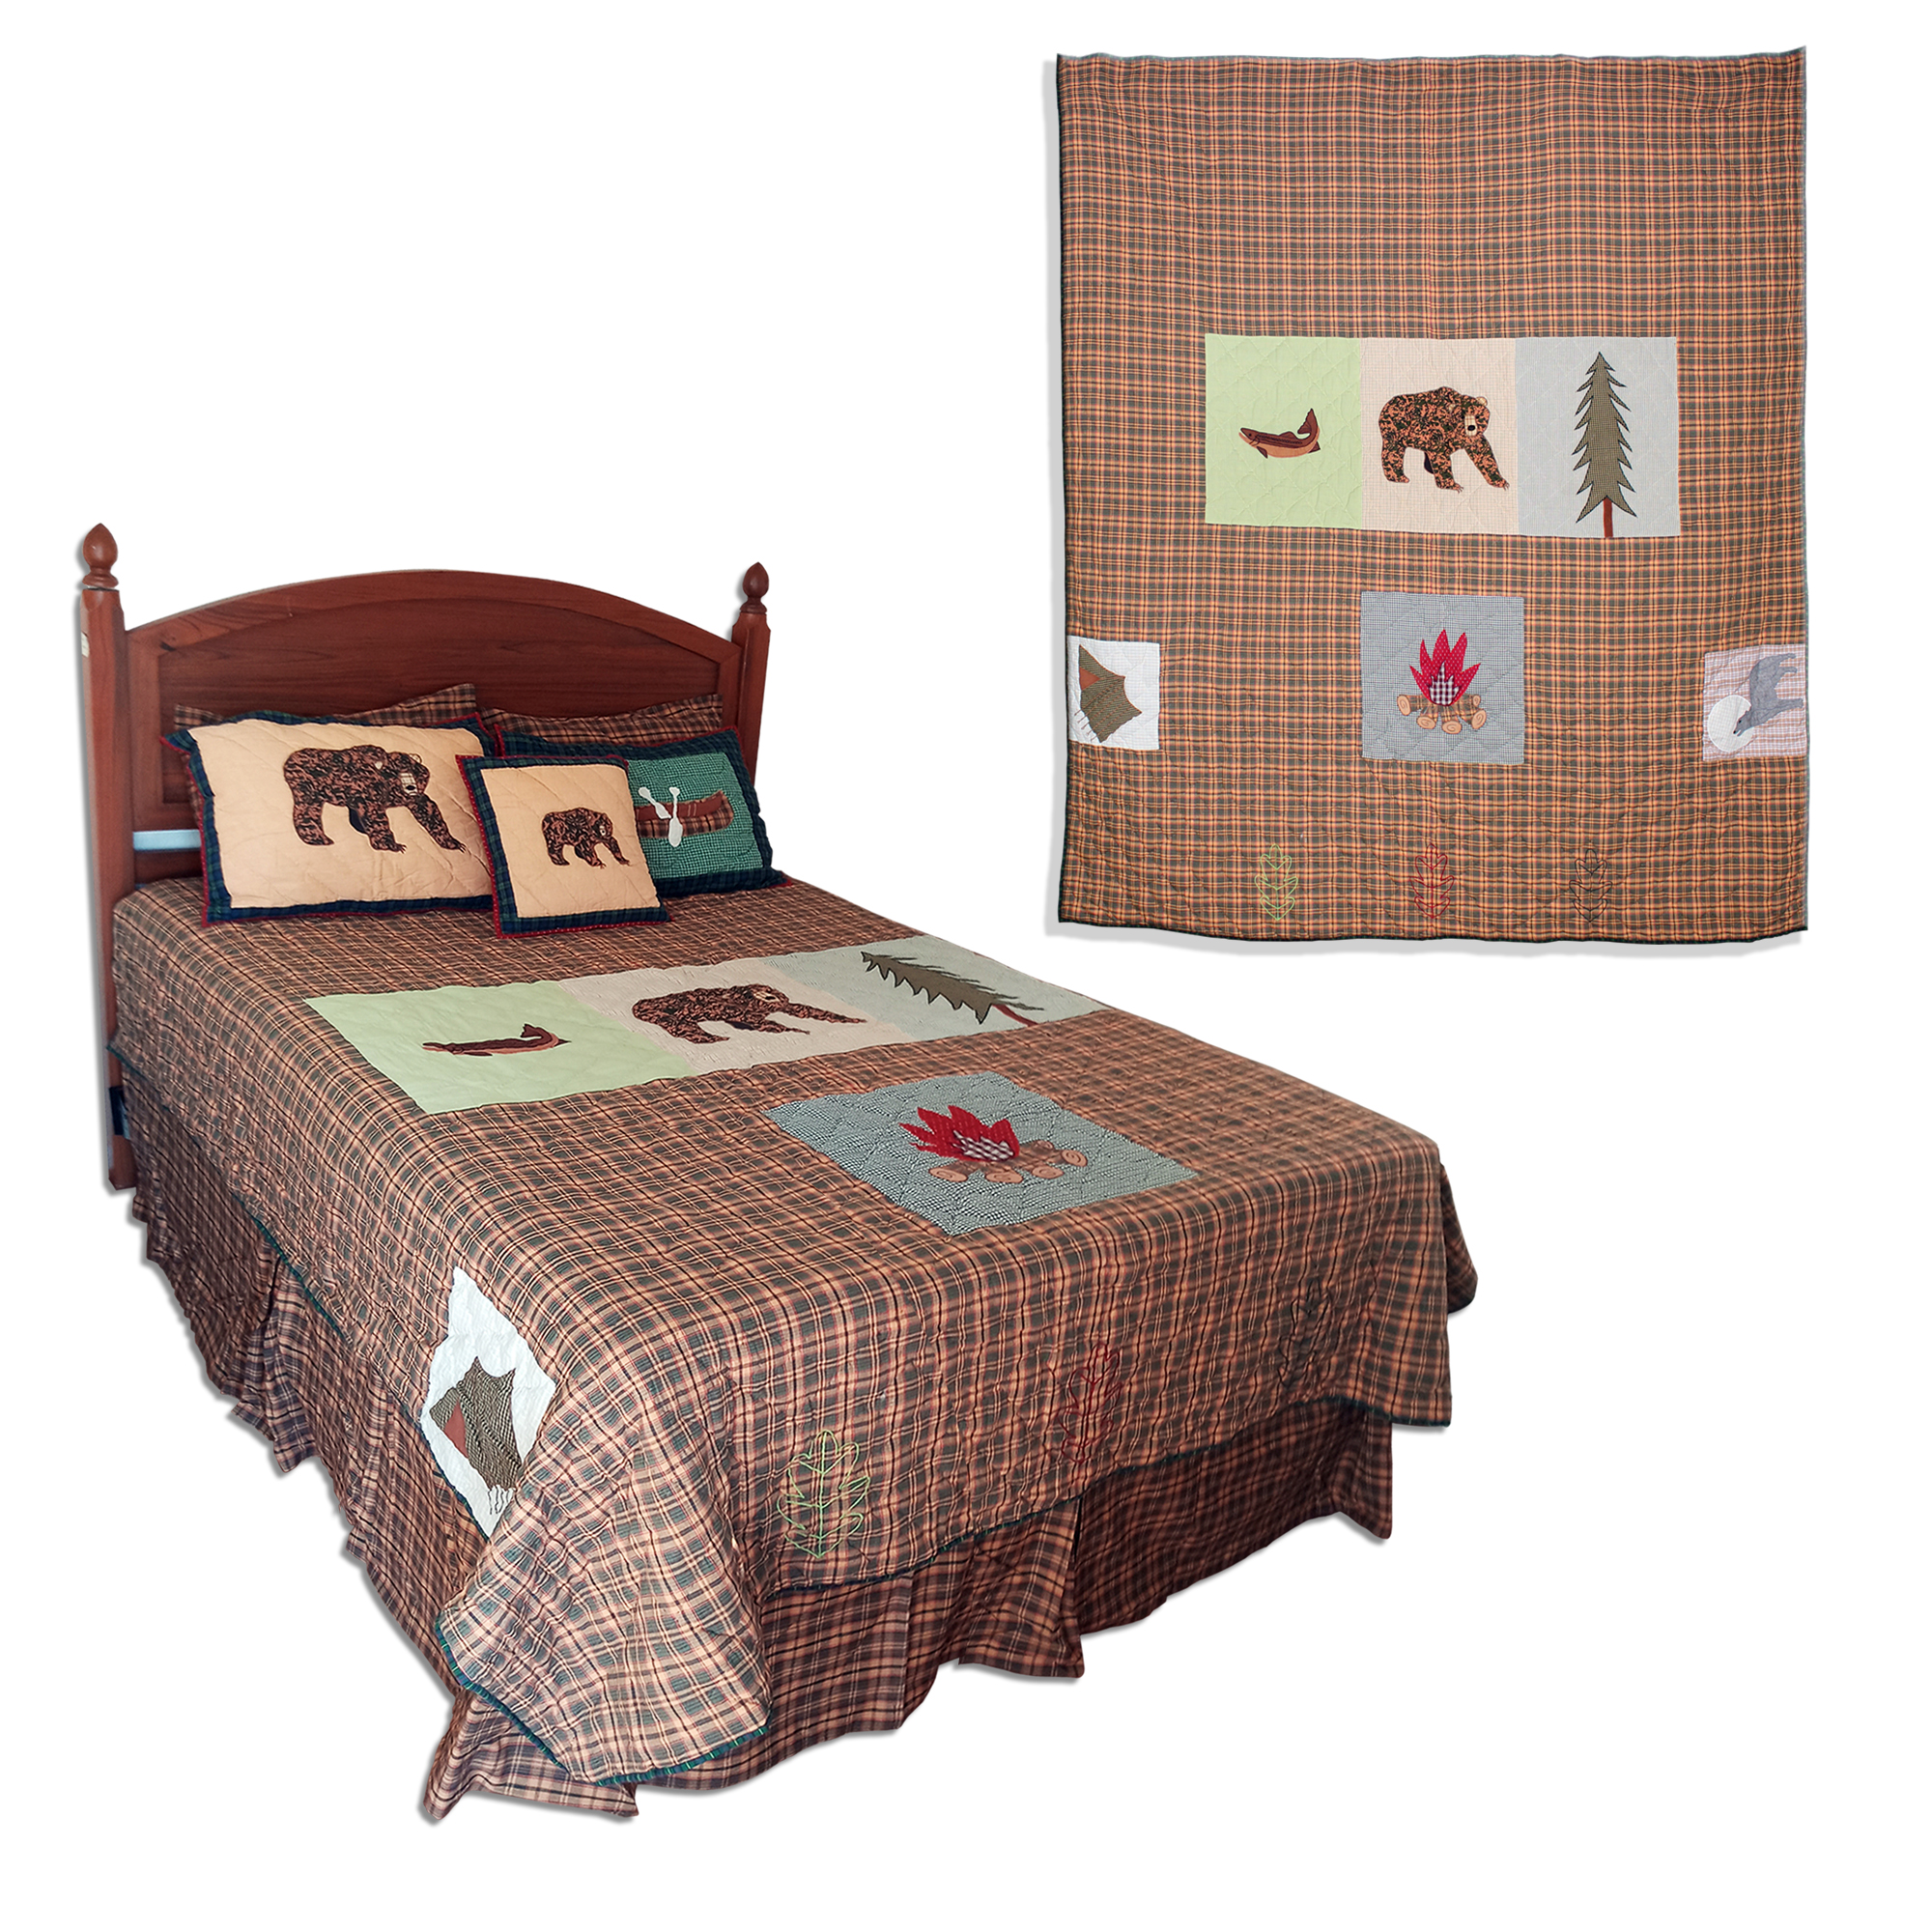 Backwoods Trek, Gold and Brown Plaid California King Quilt 114"W x 96"L